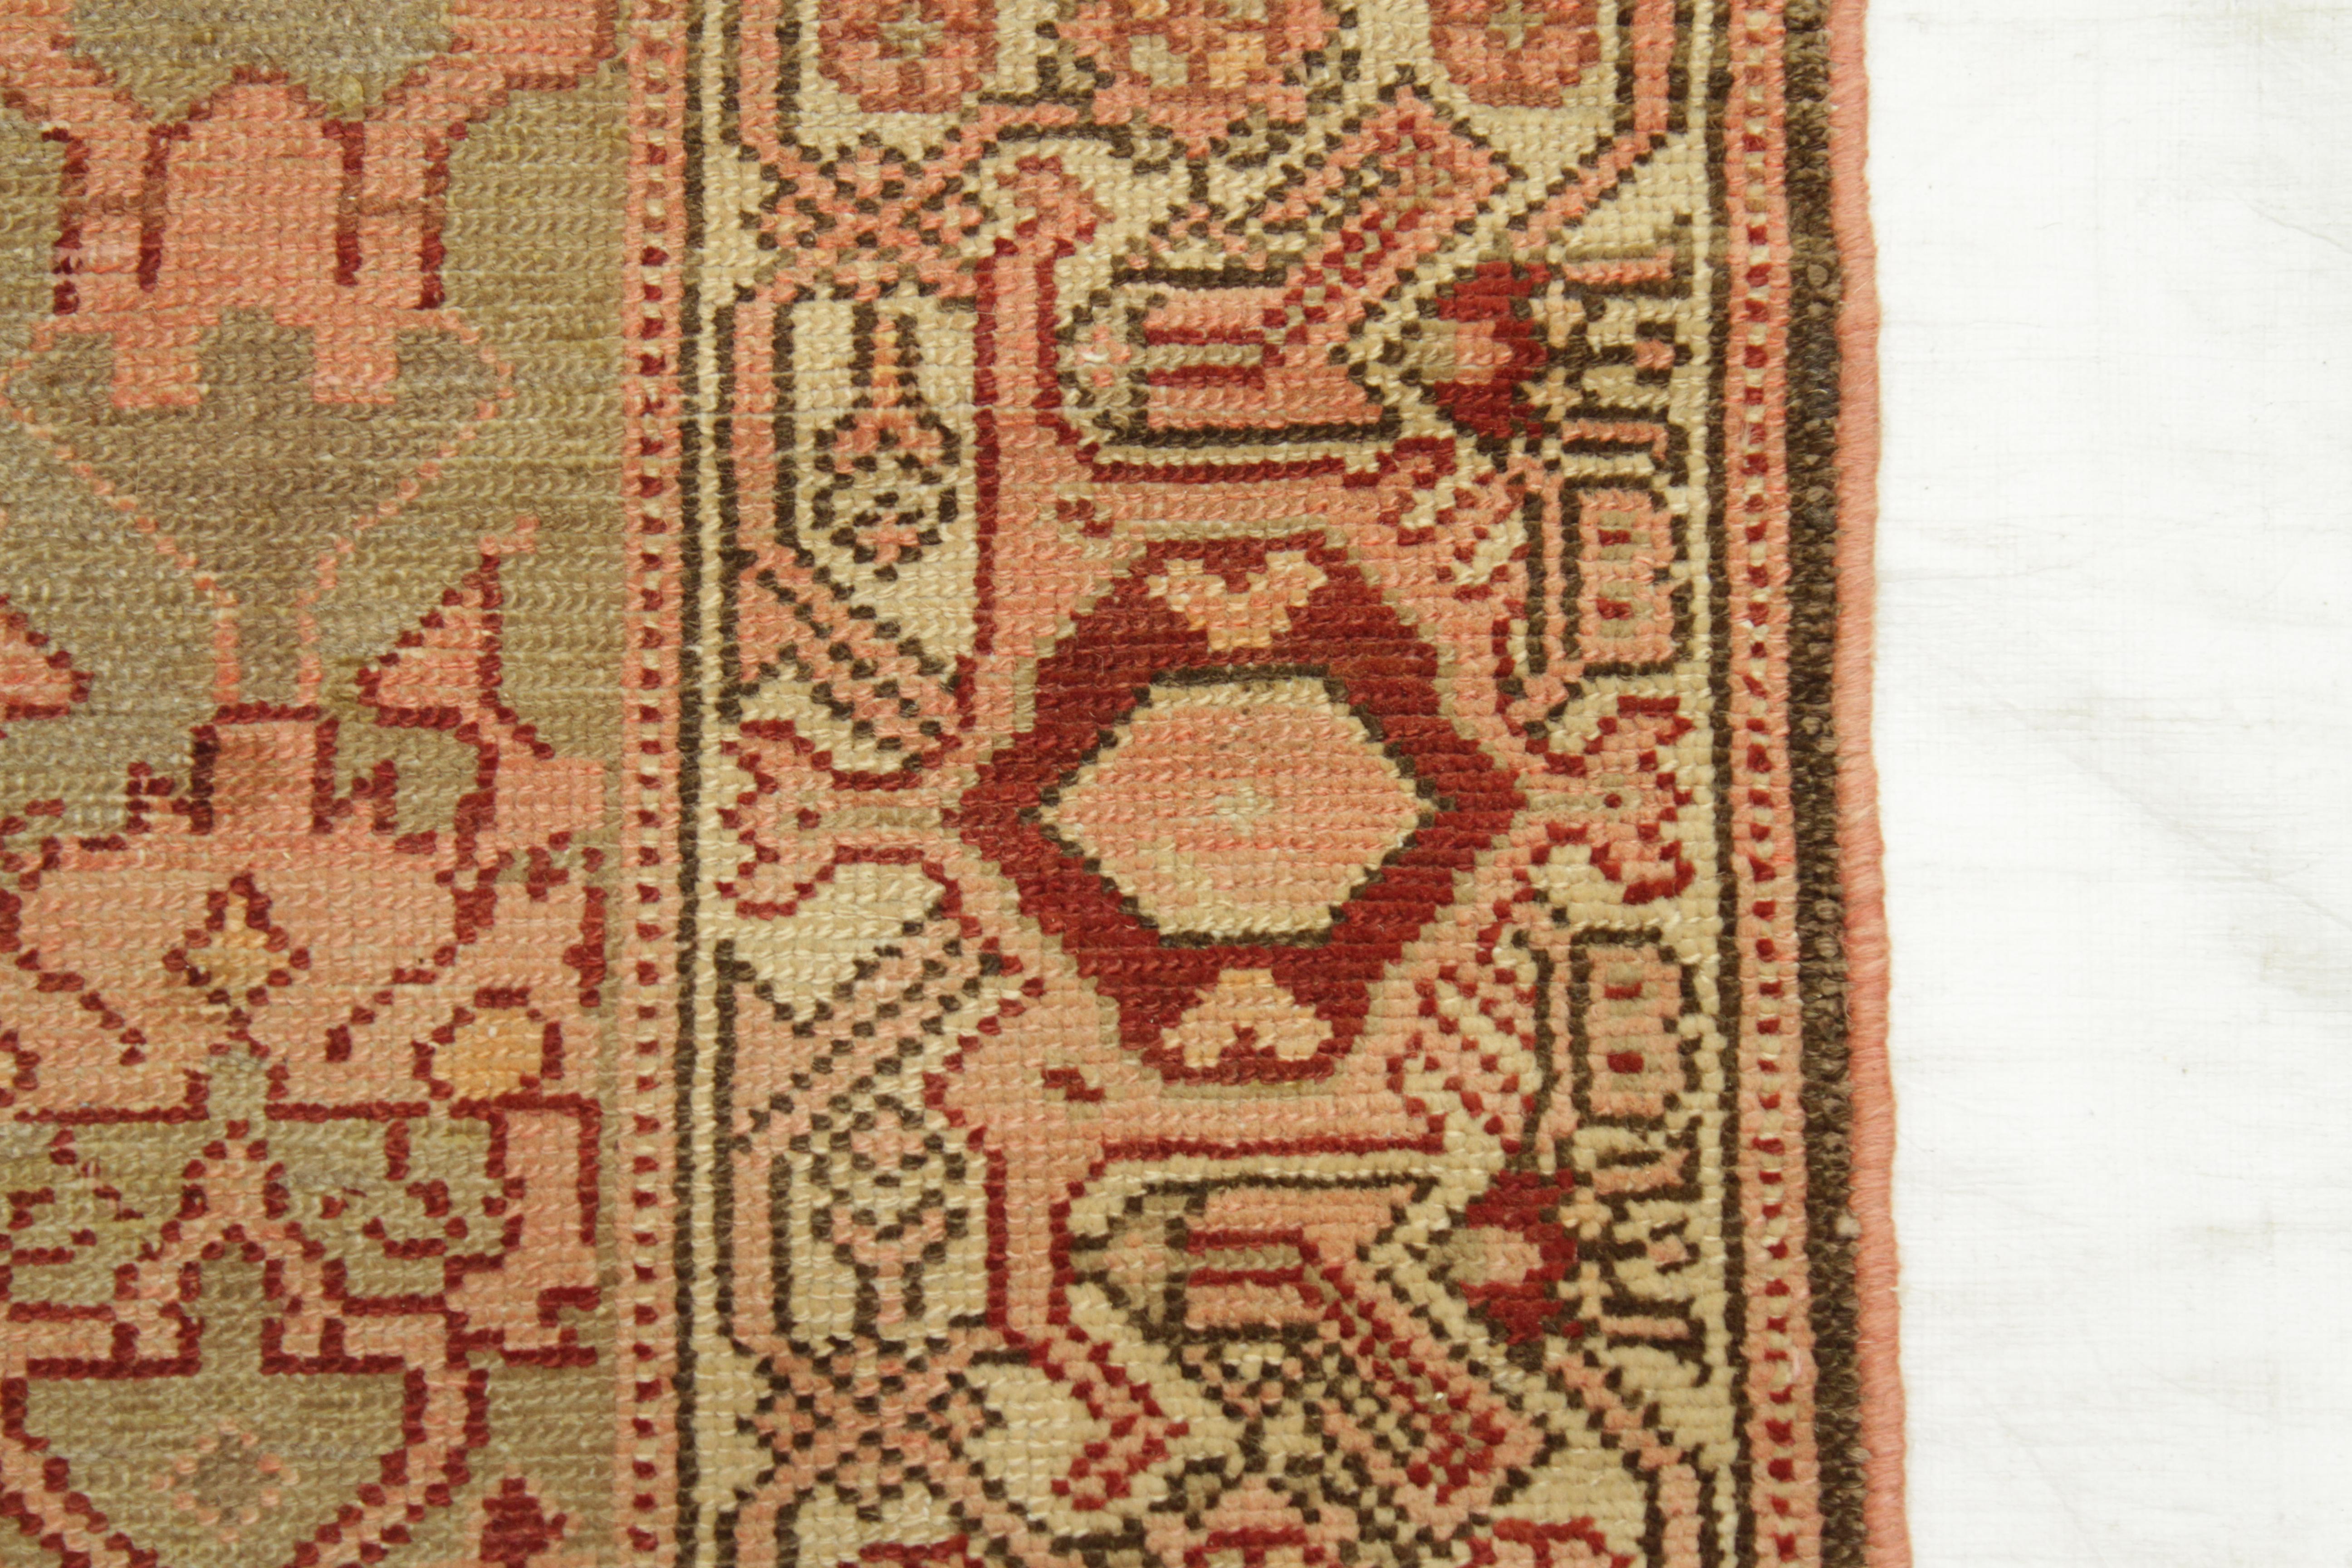 Antique Persian Rug Malayer Style with Fiery Floral Patterns, circa 1920s For Sale 3